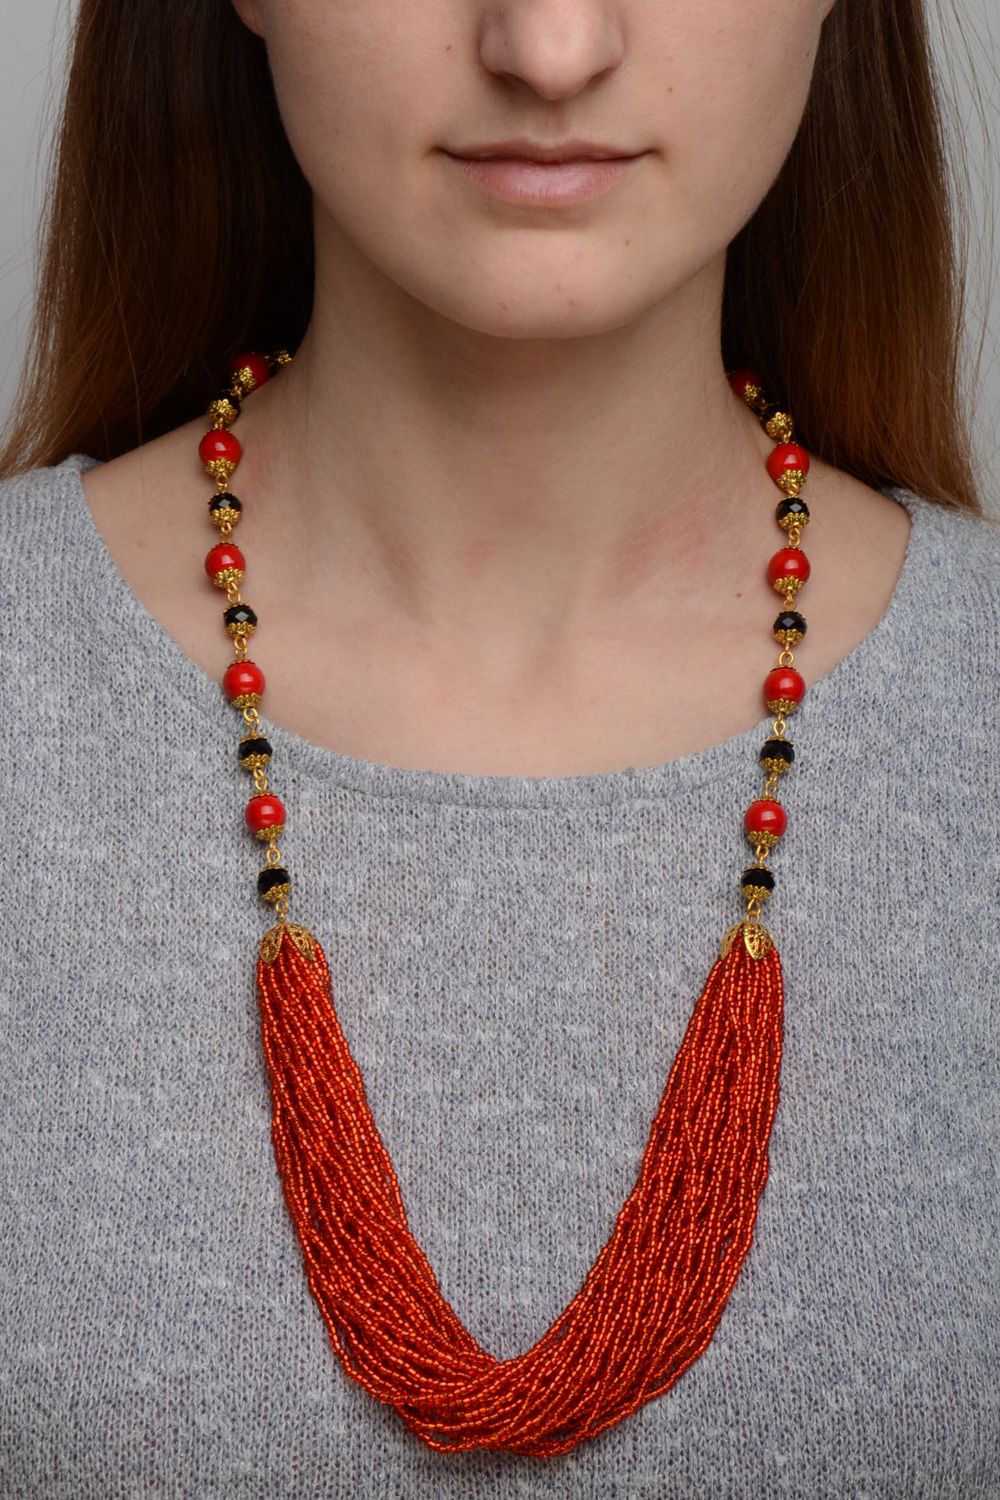 Handmade multi row necklace woven of Czech and wooden beads of red and black colors photo 5